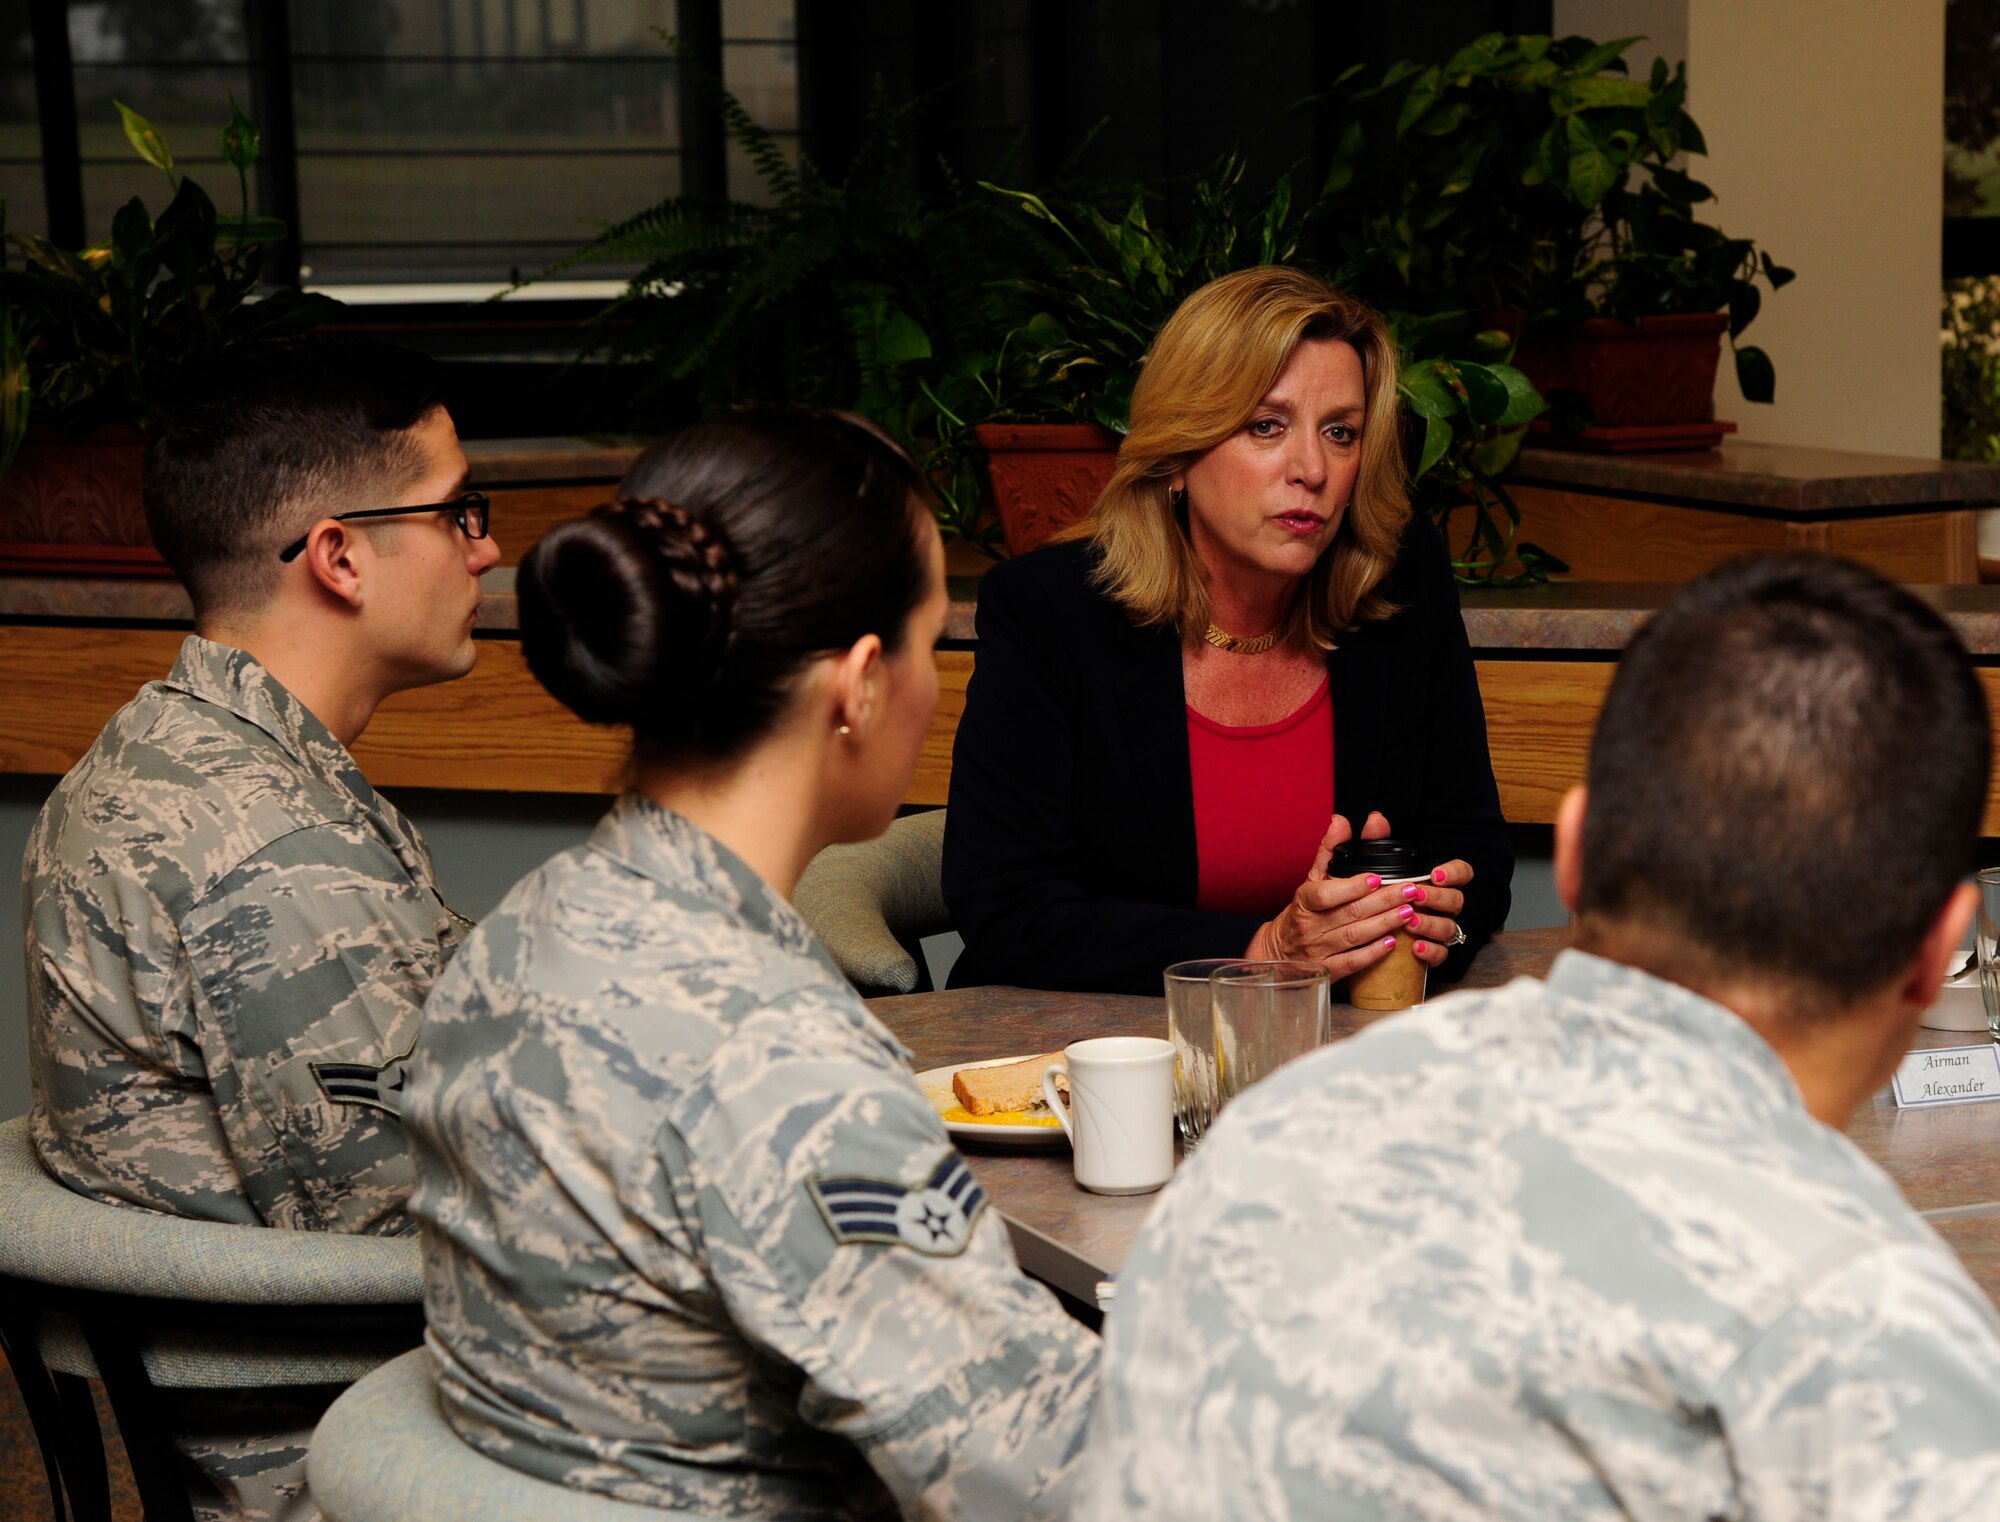 Secretary of the Air Force, Deborah Lee James, talks with Airmen of the 30th Space Wing during breakfast Sept. 24, 2014, Vandenberg Air Force Base, Calif. The meeting was a chance for Airmen to speak directly with the Secretary about Air Force topics. (U.S. Air Force photo by Tech. Sgt. Tyrona Lawson/ Released)

